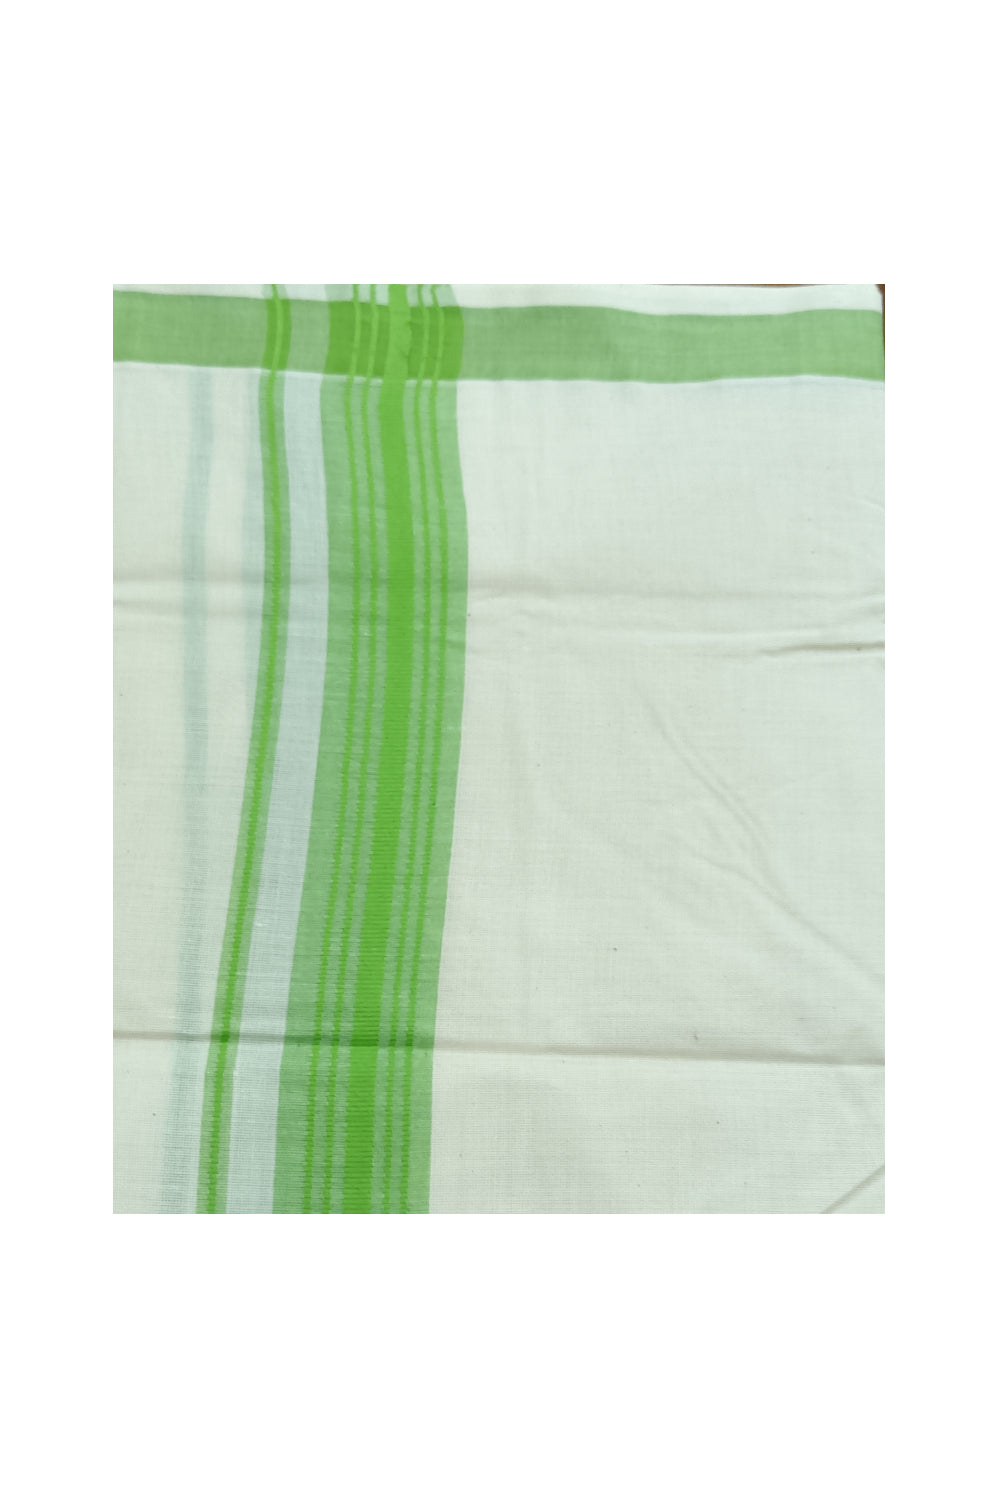 Off White Kerala Double Mundu with Light Green Lines Border (South Indian Dhoti)